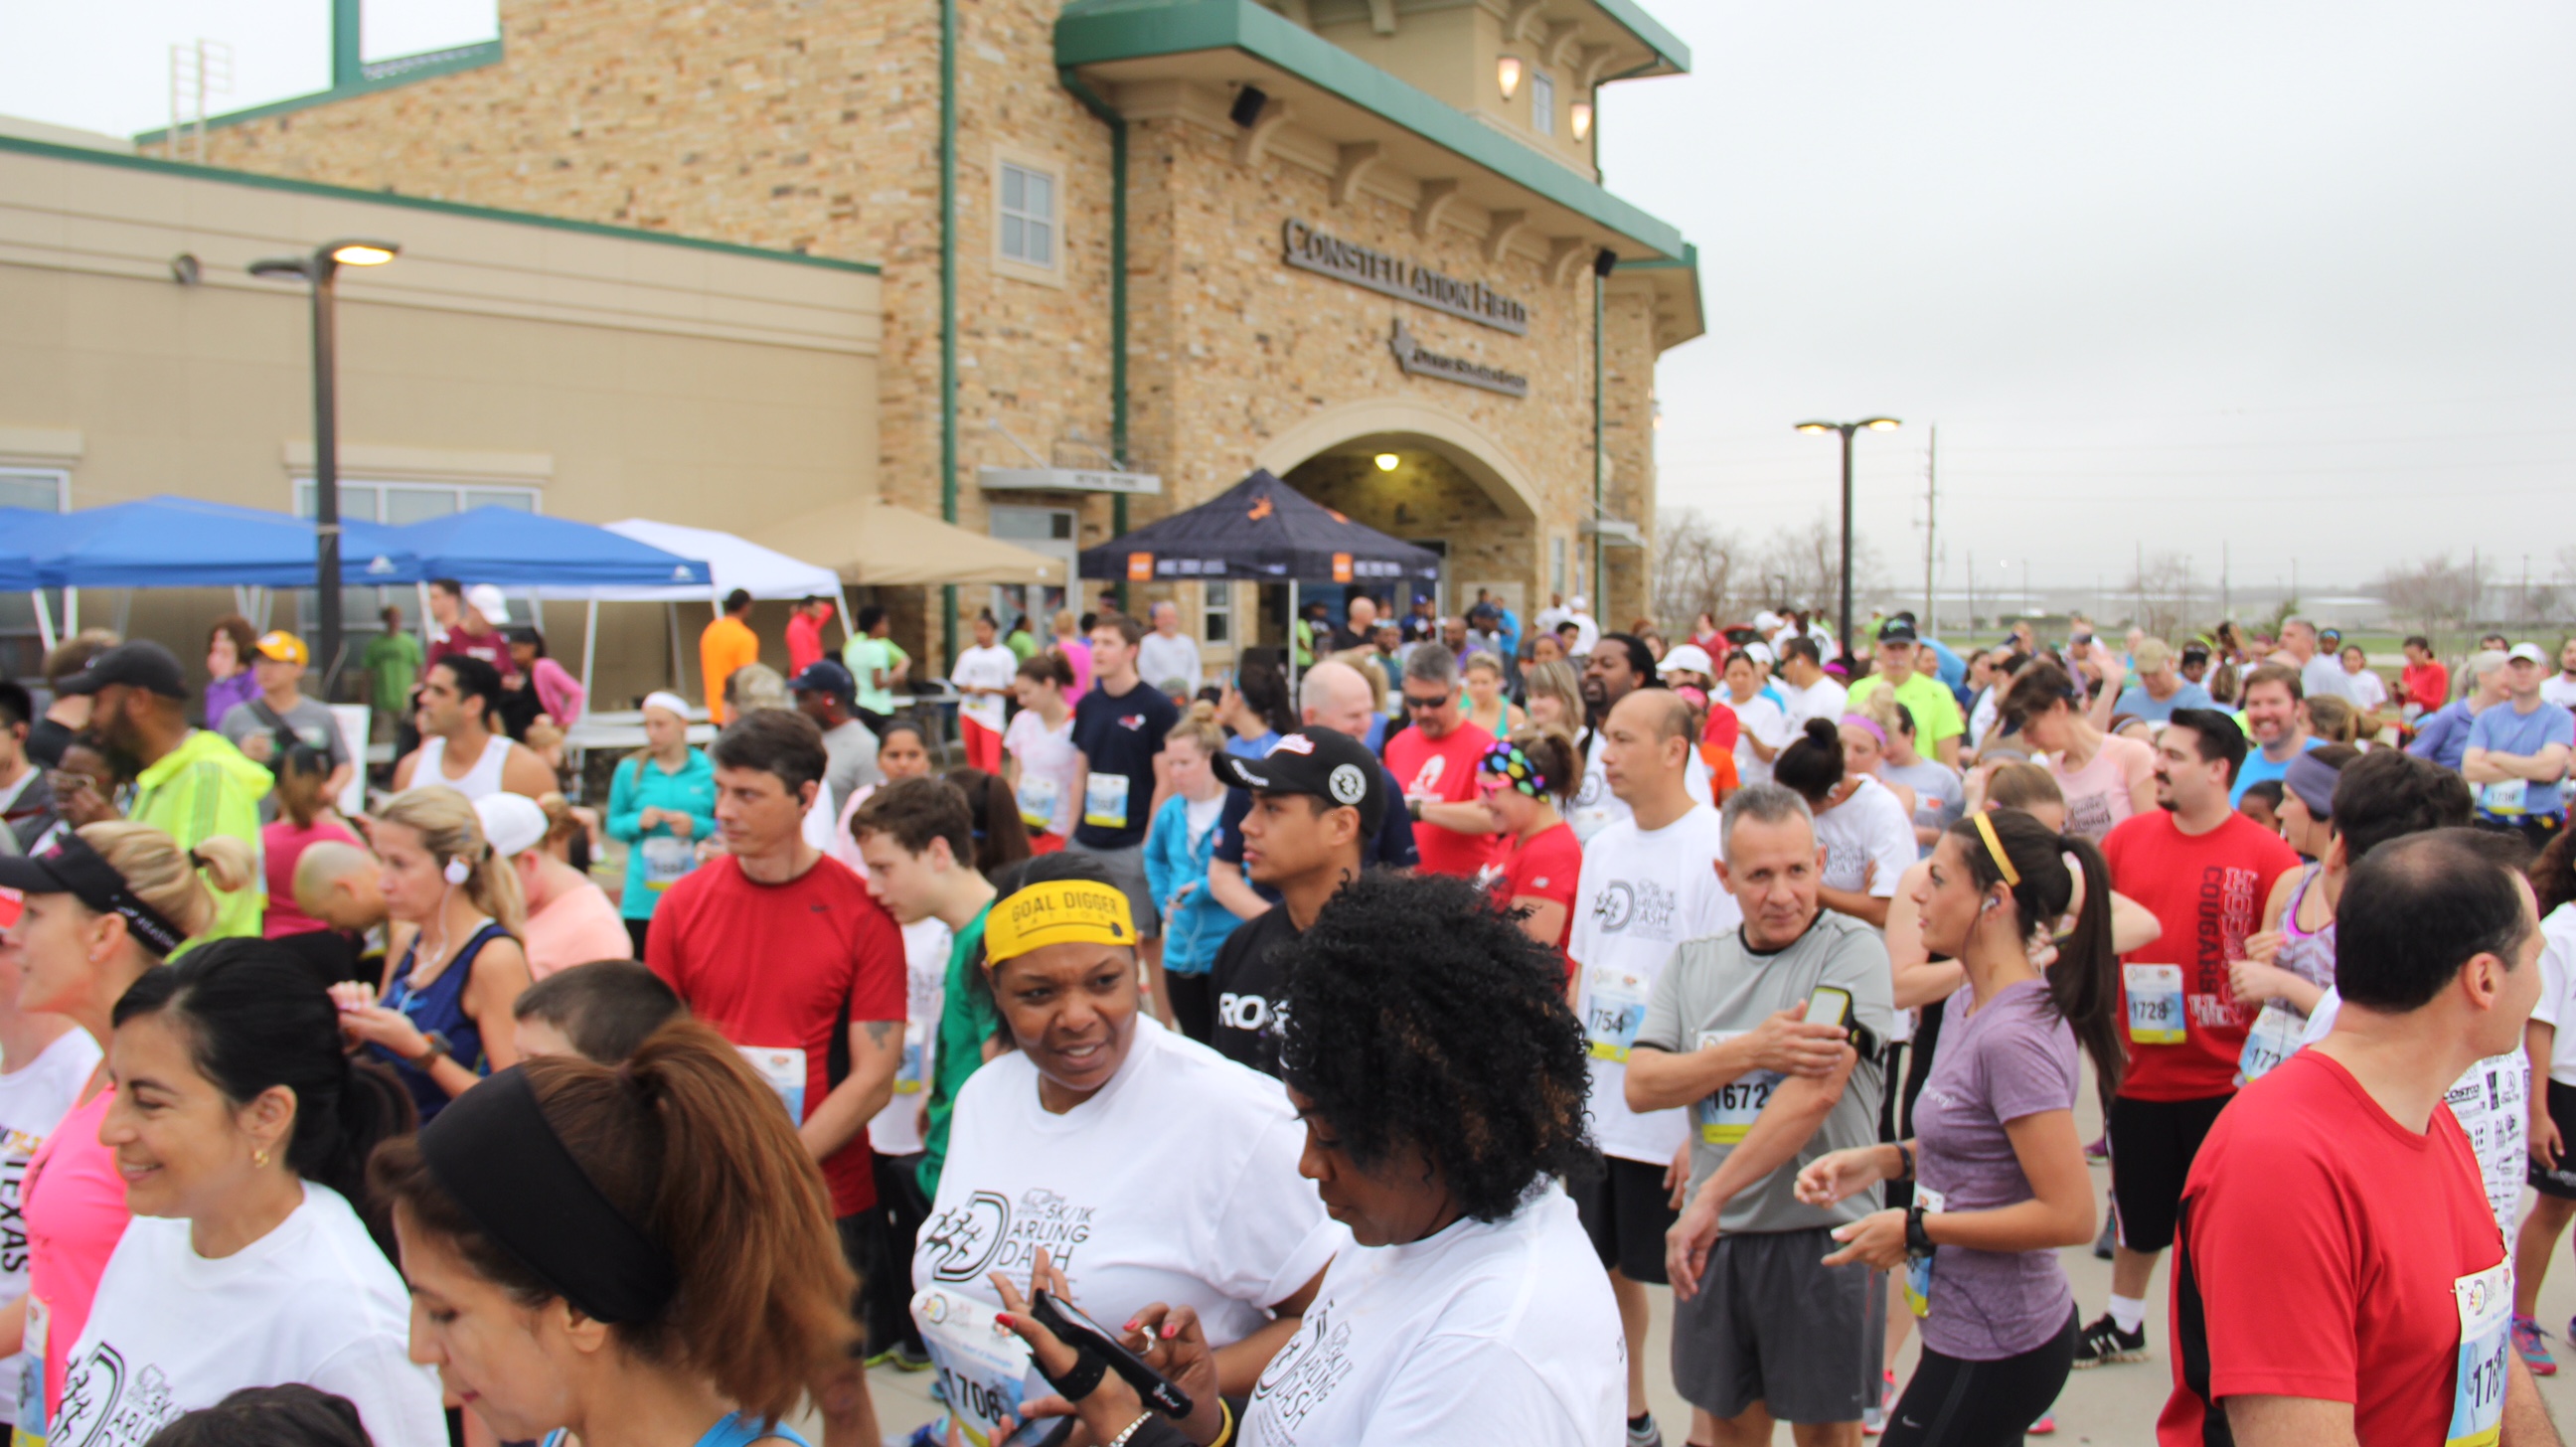 Fifth Annual Darling Dash from As One Foundation attracted a crowd of approximately 300 to Constellation Field (Skeeters Stadium) in Sugar Land on Sun. Feb. 22, to raise sickle cell awareness.